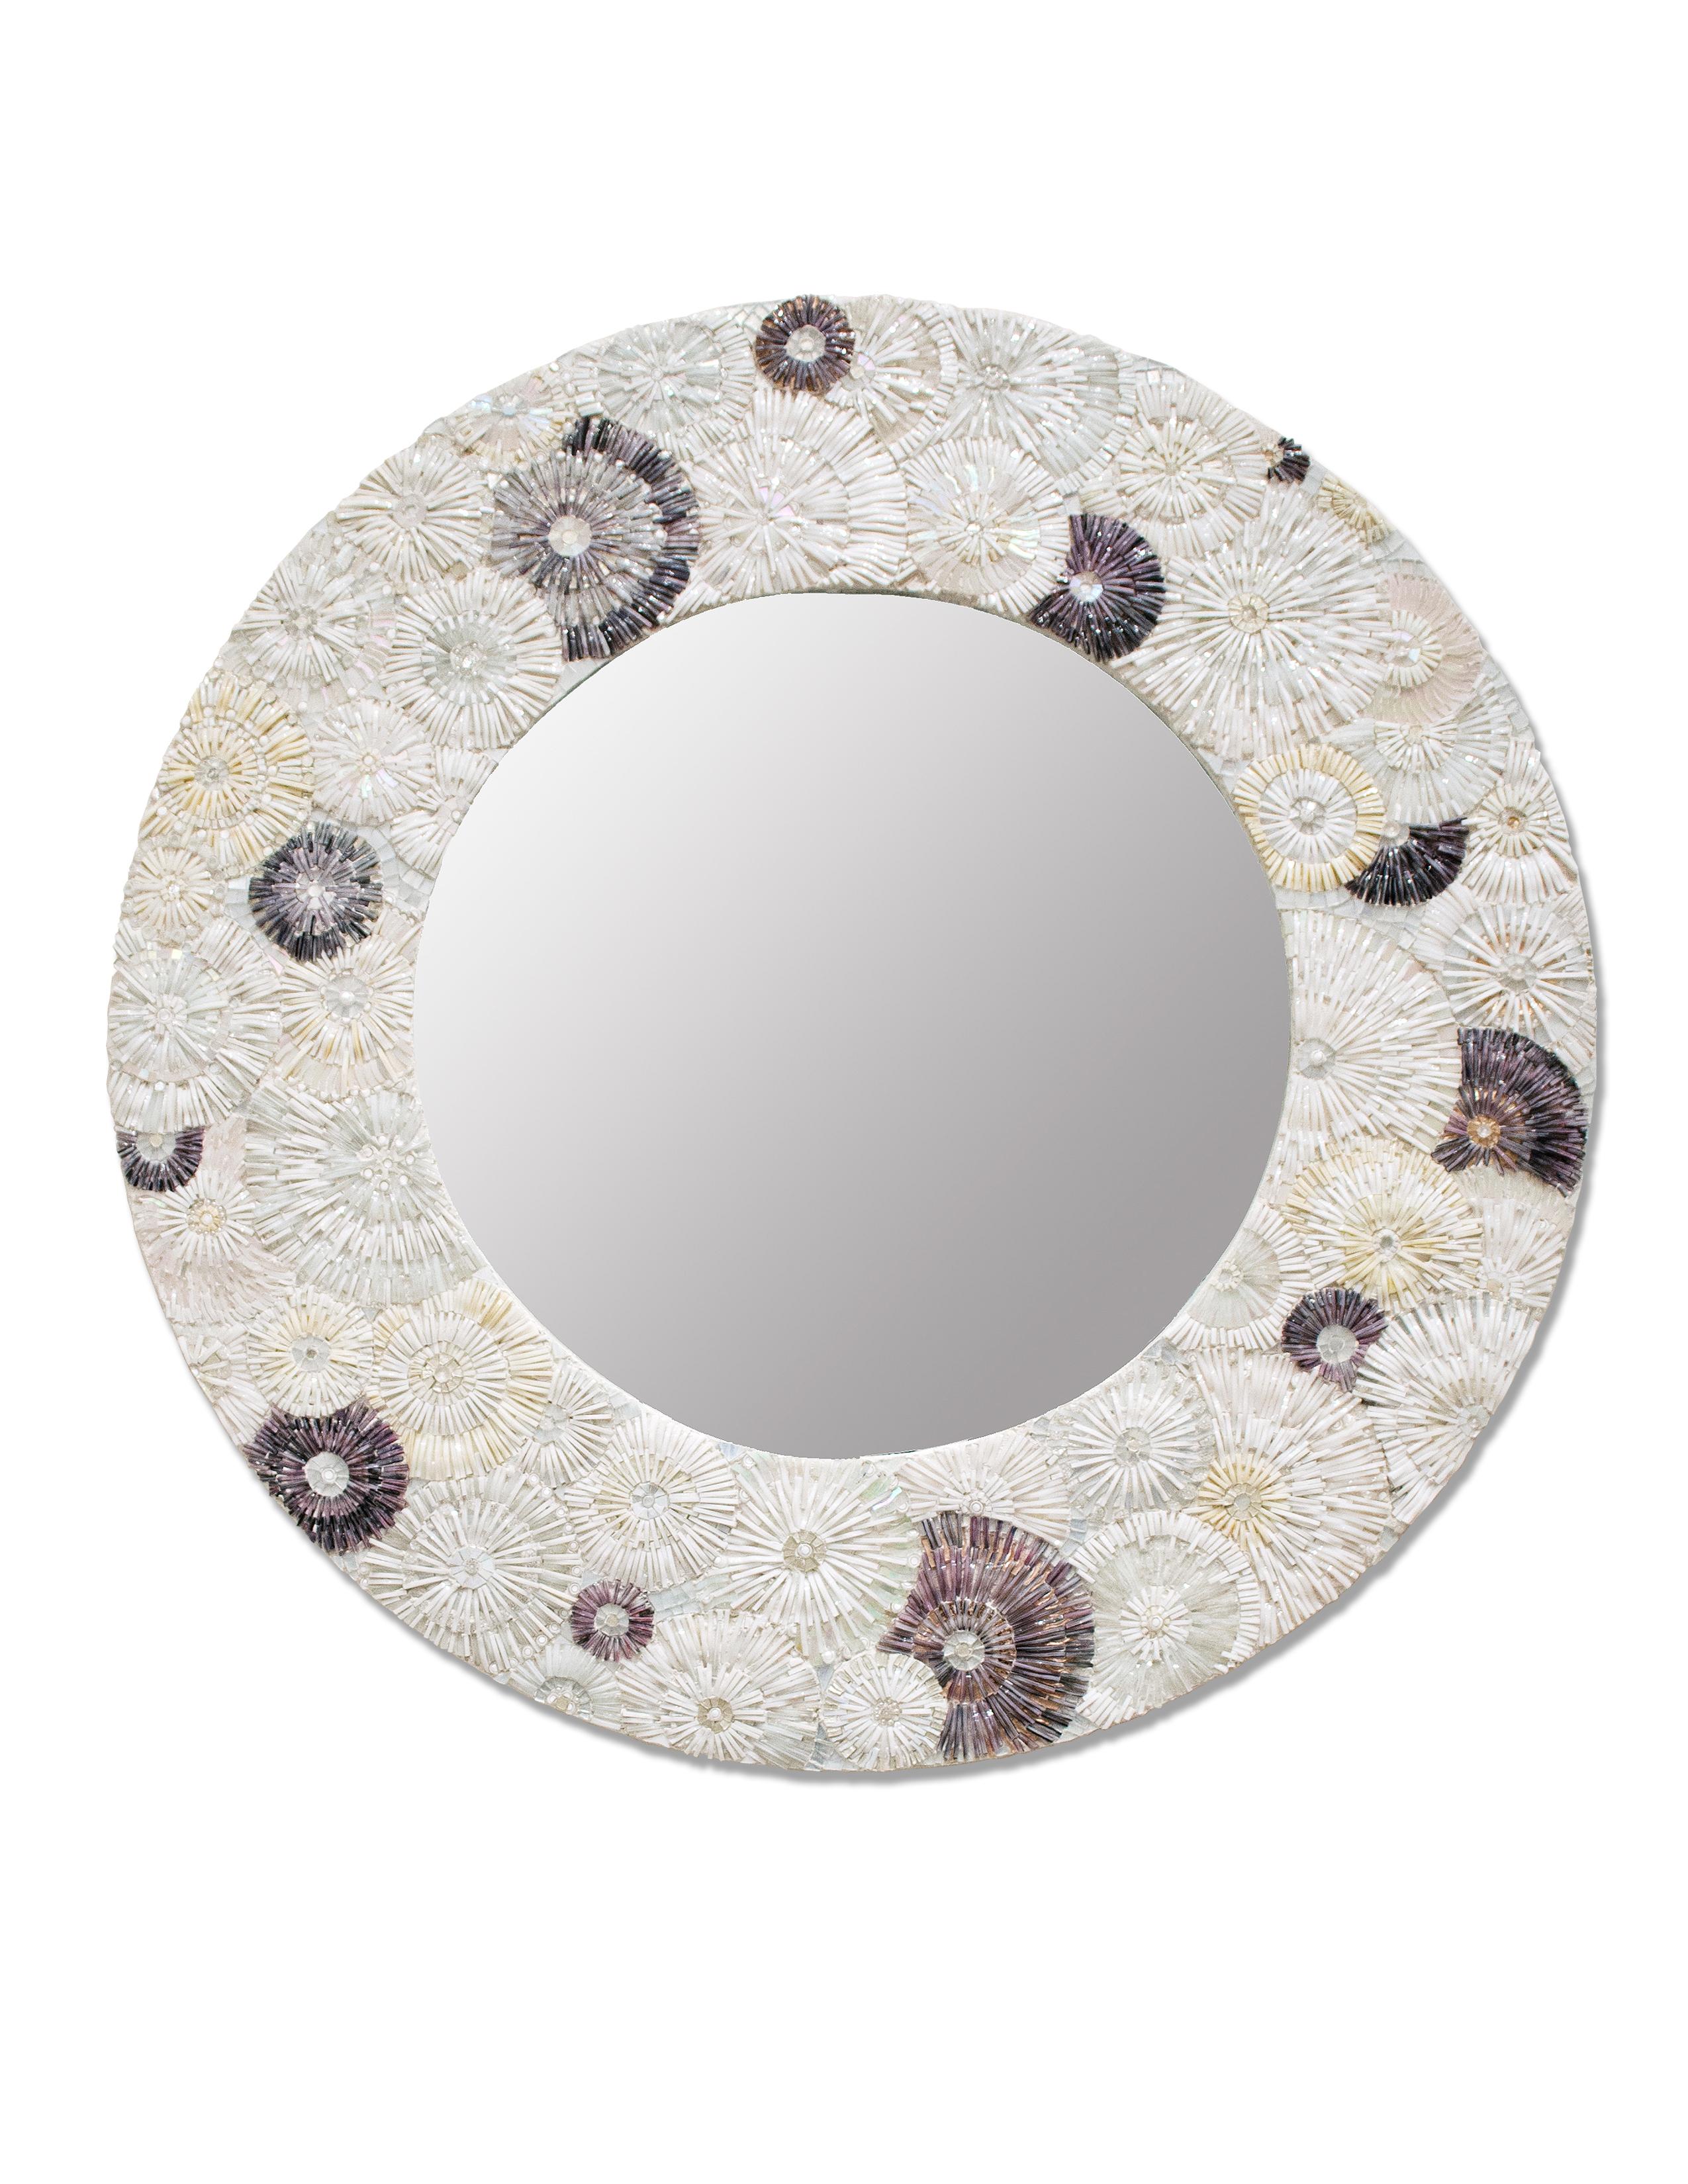 American Modern Whtie Blossom Glass Flower Mosaic Oval Mirror by Ercole Home For Sale